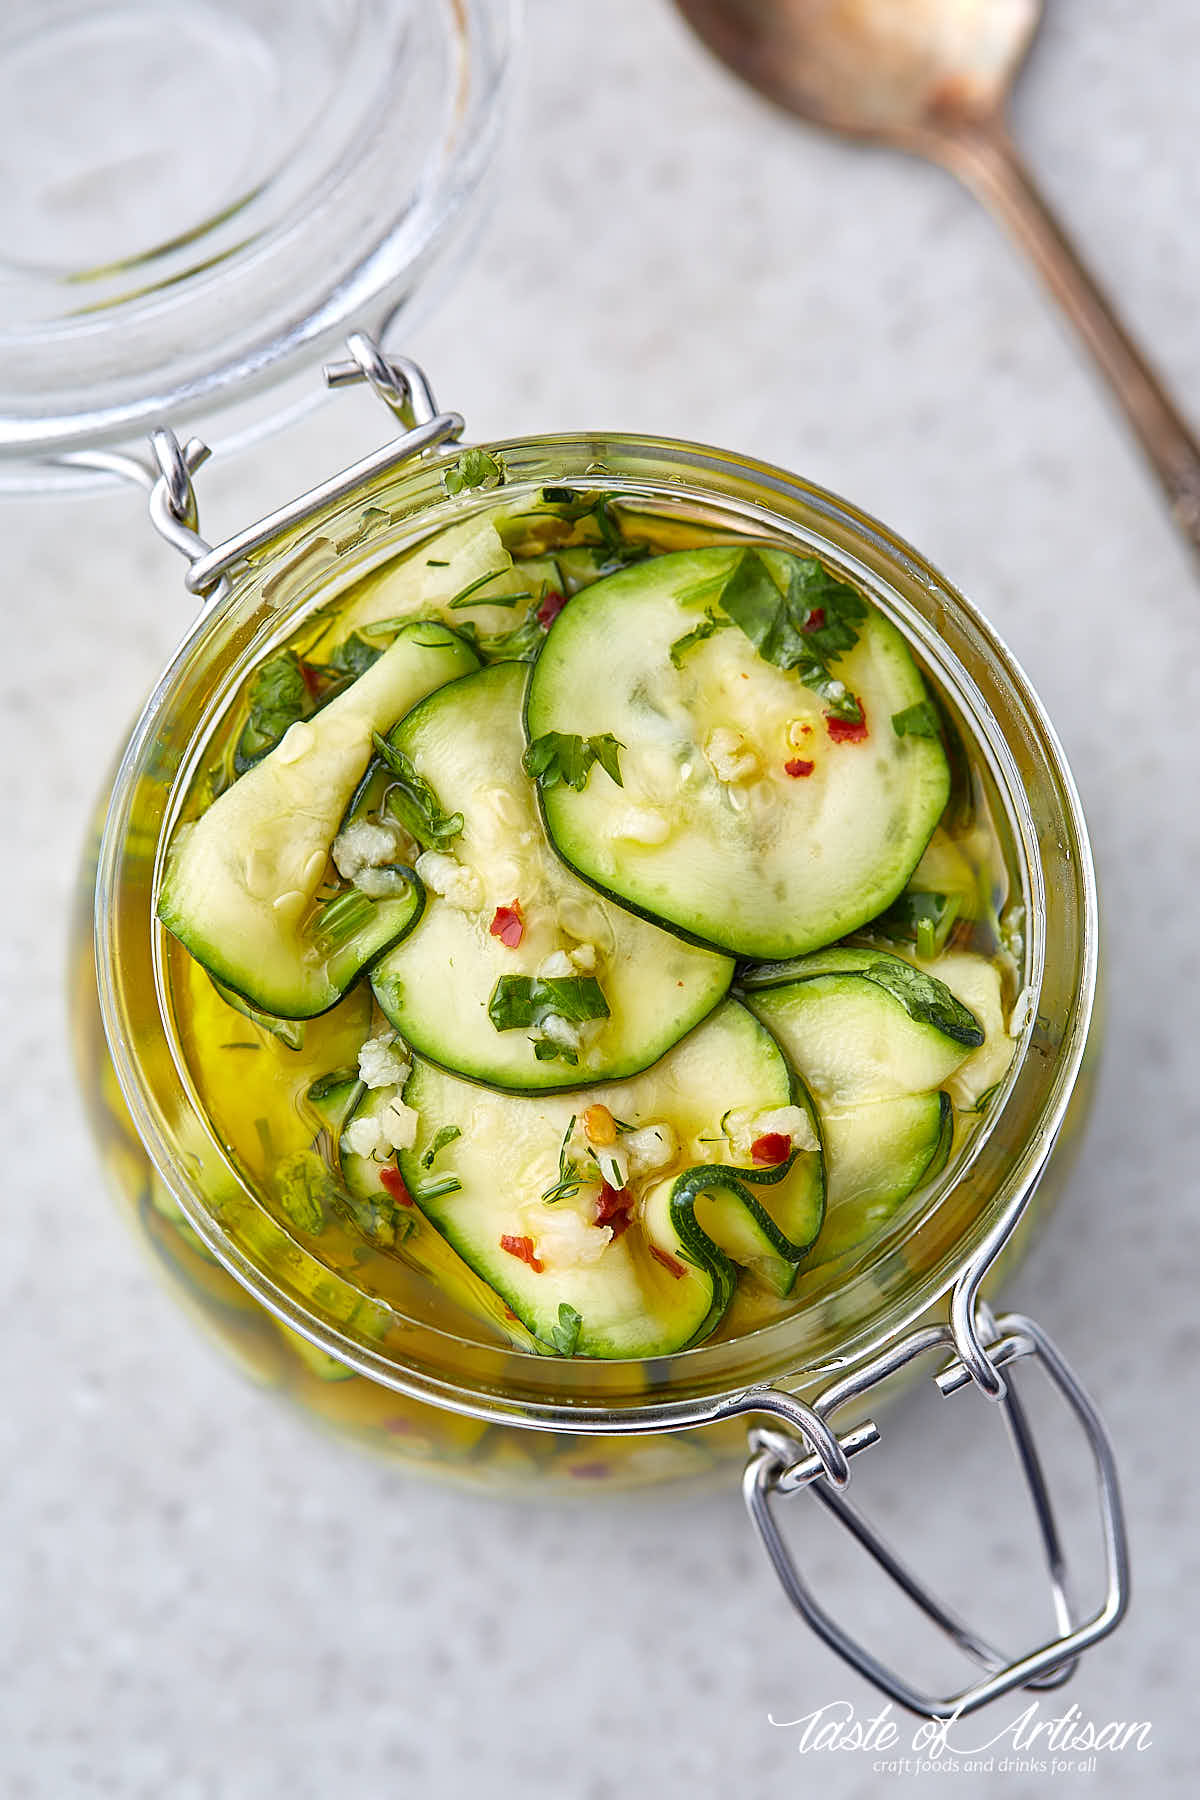 Top down view of slices of marinated zucchini in a glass jar.